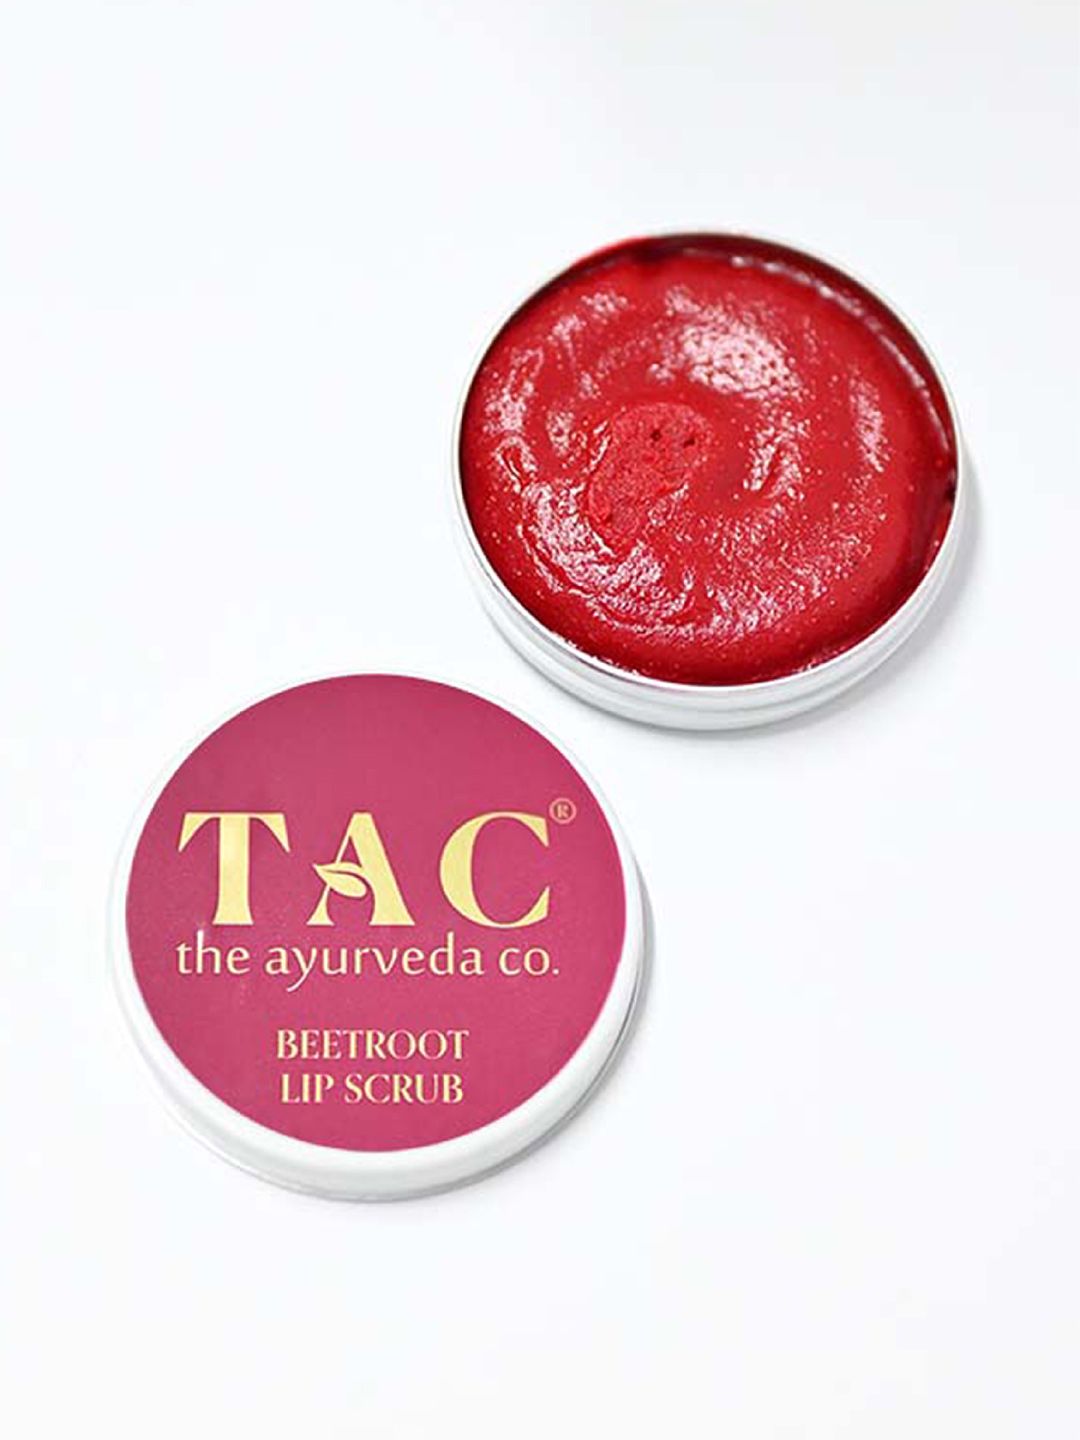 TAC - The Ayurveda Co. Beetroot Lip Scrub for Dark, Dry & Chapped Lips with Coconut Oil Price in India